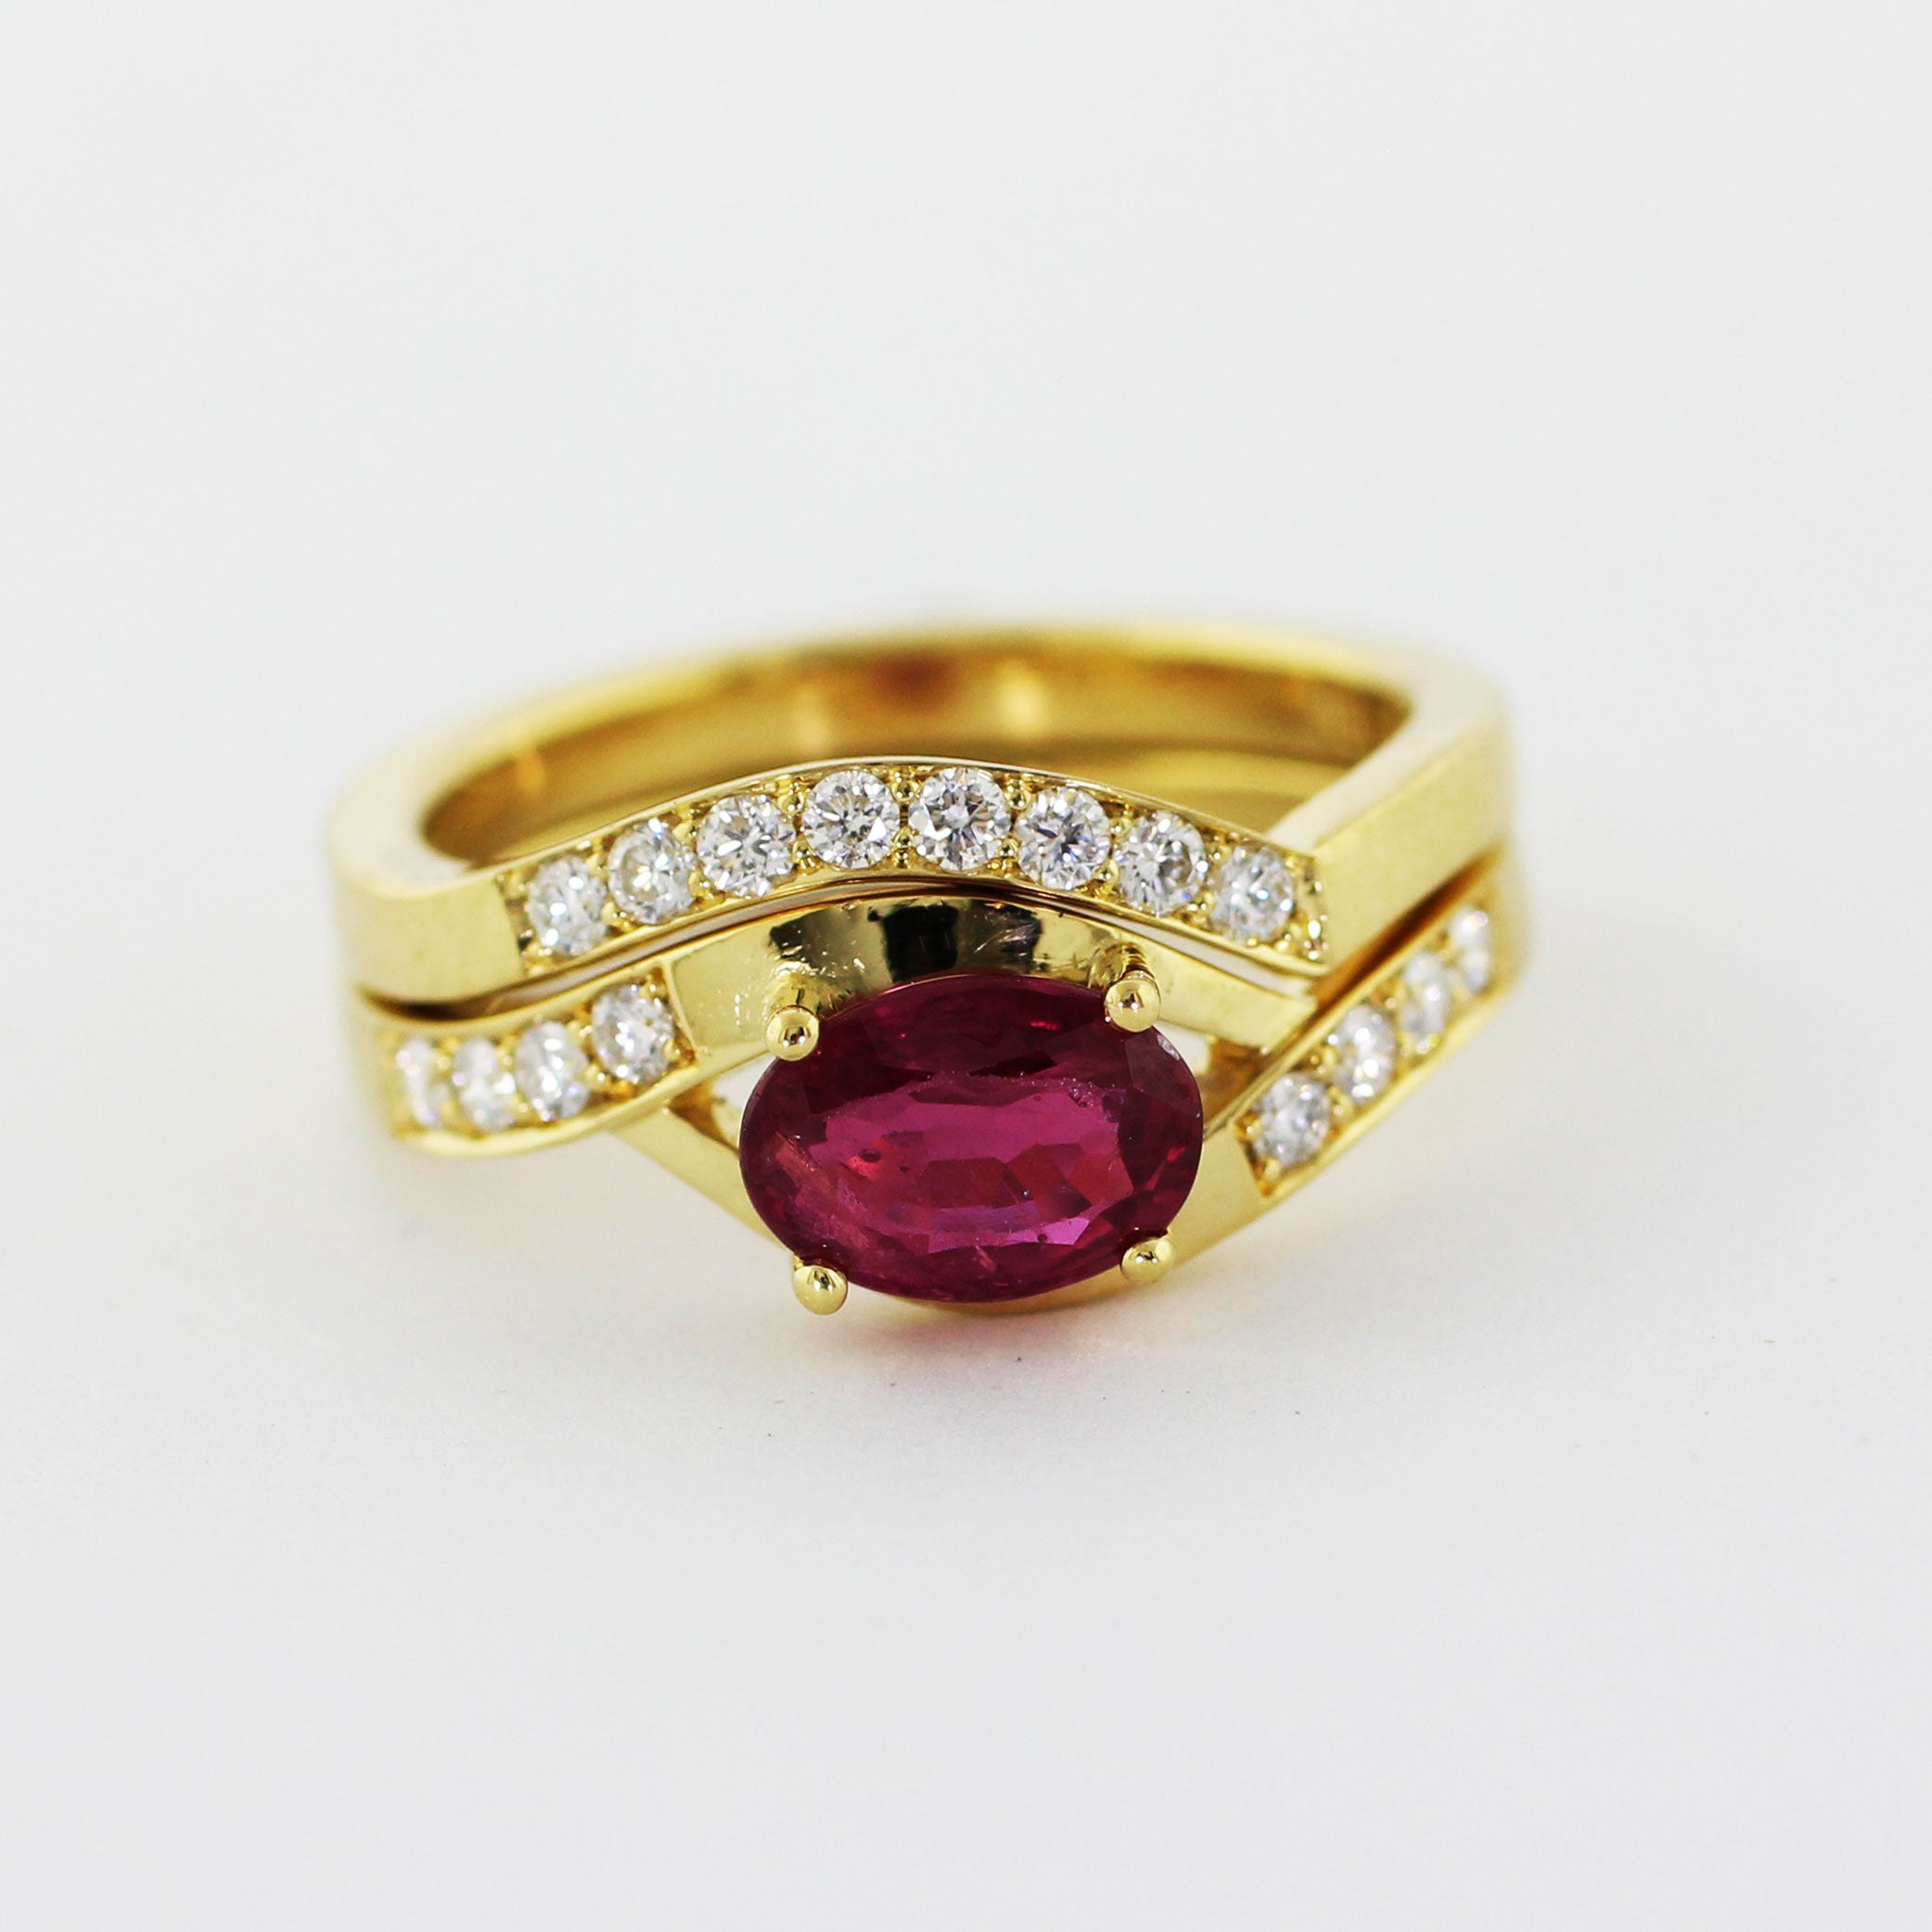 Custom 18k yellow gold engagement ring and matching wedding band, hand-fabricated with a bypass-style crown. The engagement ring features a brilliant prong-set center ruby with four 2.2mm diamonds on each side. The matching shadow band boasts the same square-edged shank adorned with eight 2.2mm bead-set diamonds.